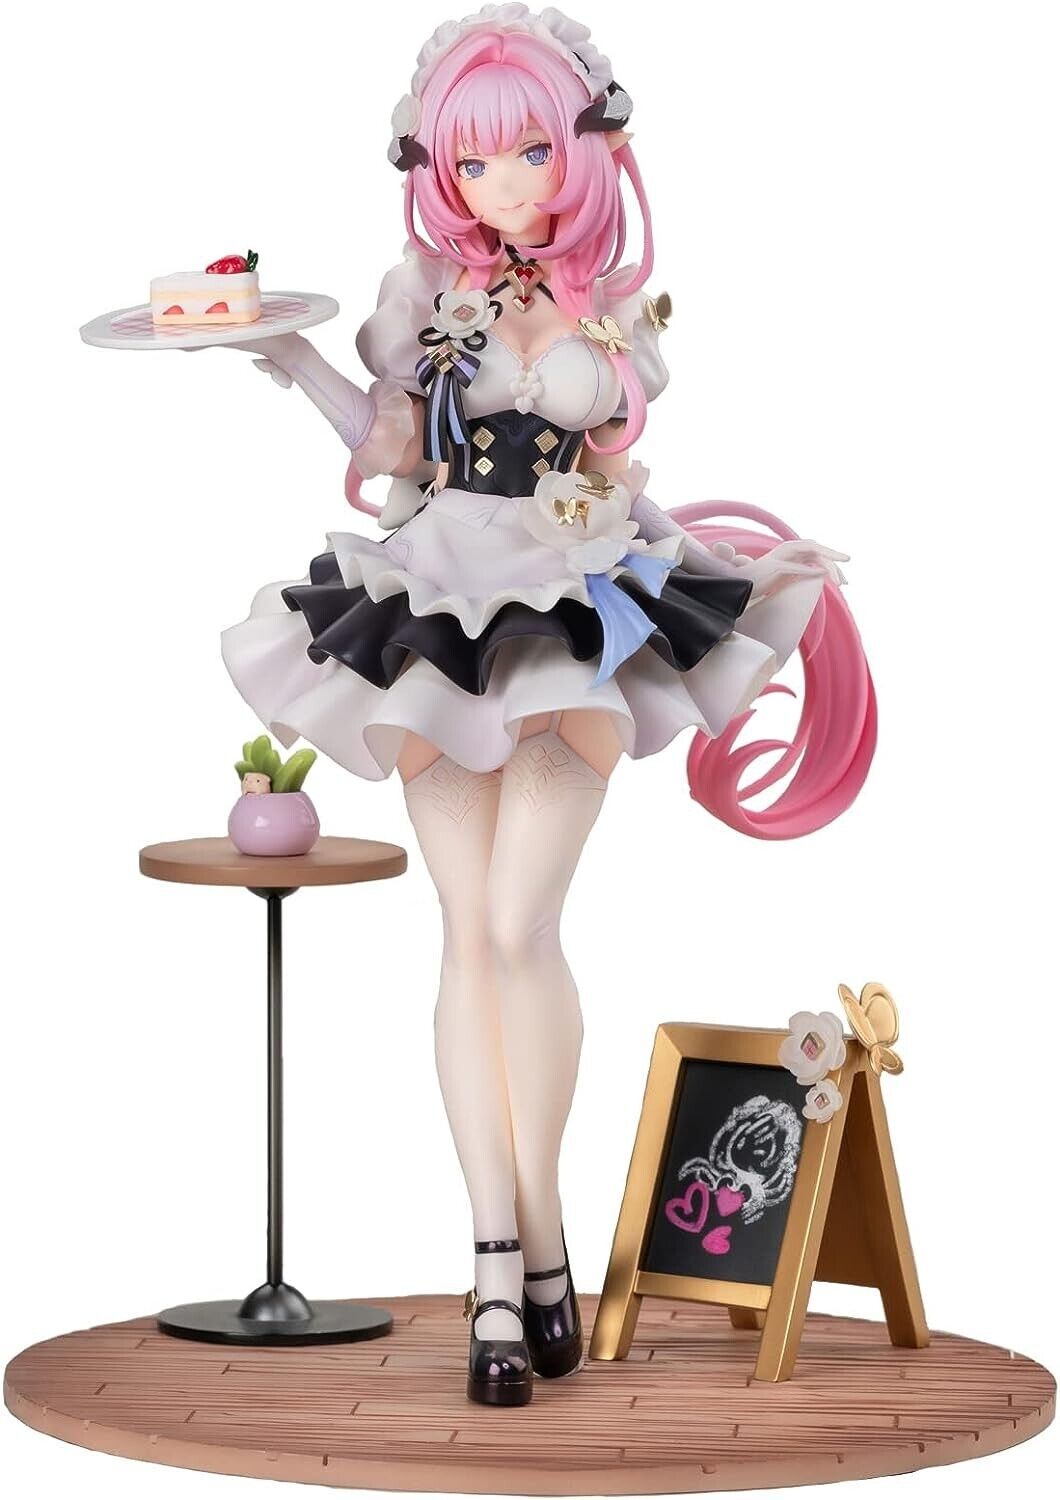 APEX Collapse 3rd Elysia Pink Maid Ver. 1/7 Scale Figure New, unopened